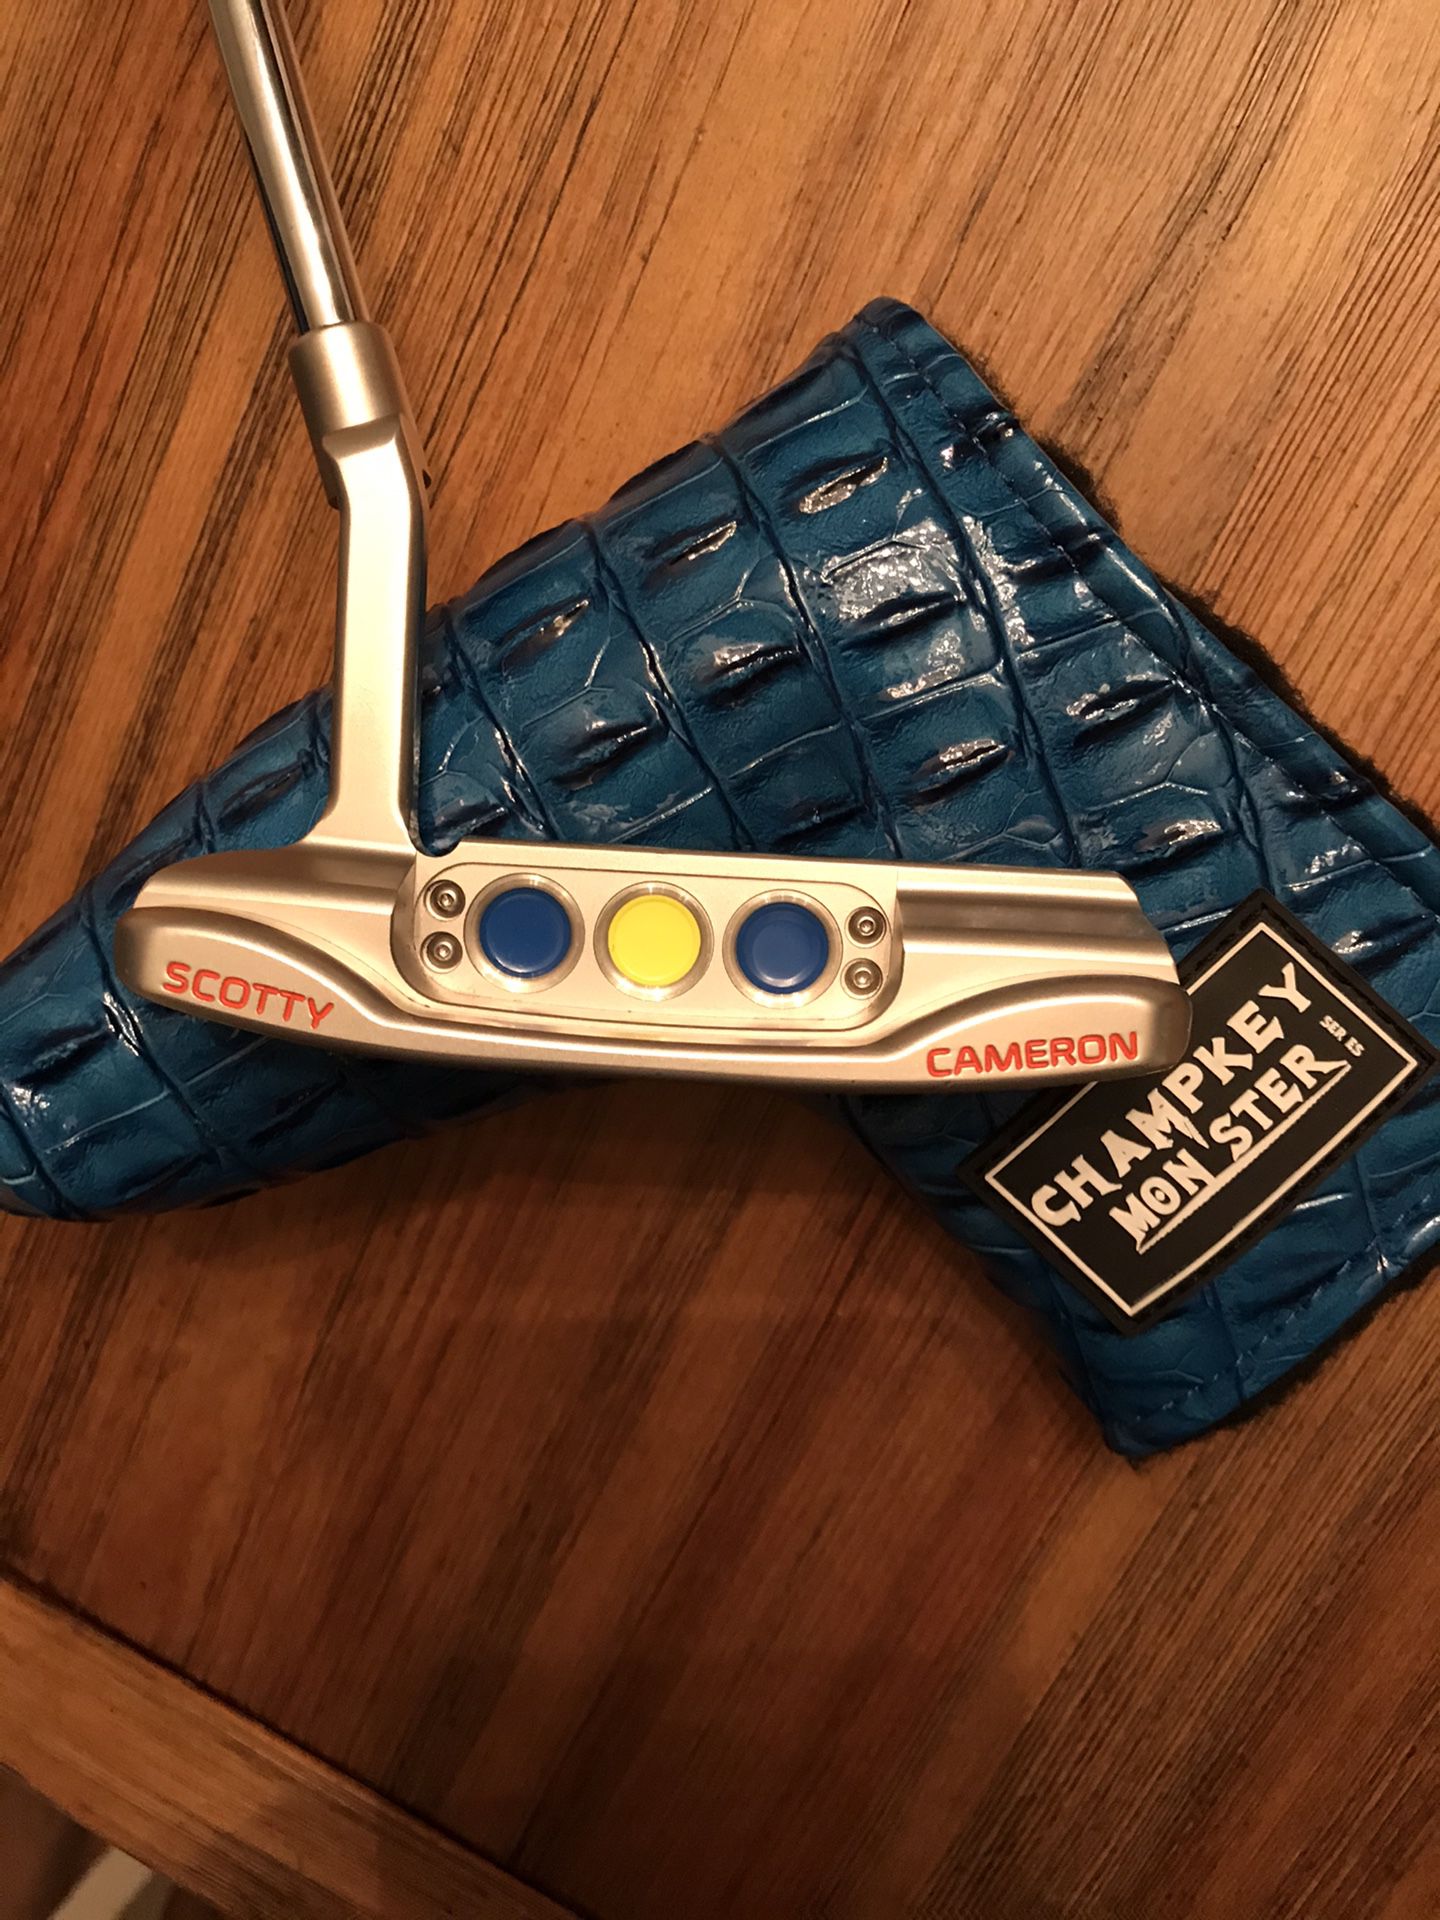 Scotty Cameron Extremely RARE Newport TCC Asia 2017 - $ 650